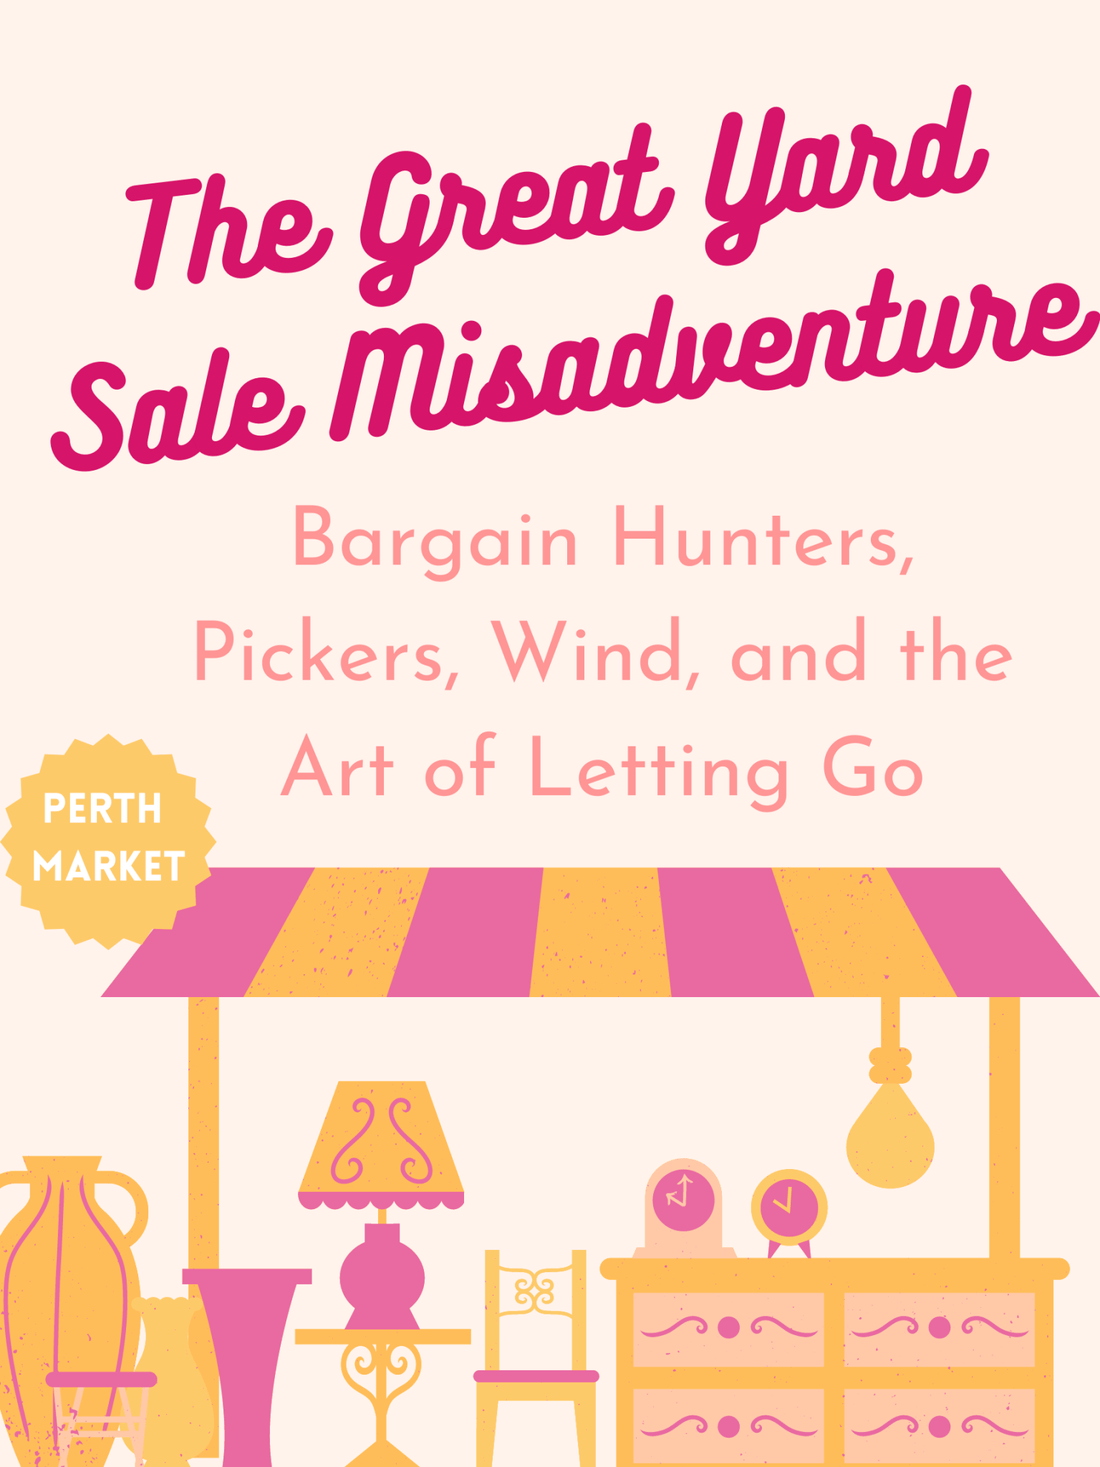 The Great Yard Sale Misadventure: Bargain Hunters, Pickers, Wind, and the Art of Letting Go - Perth Market